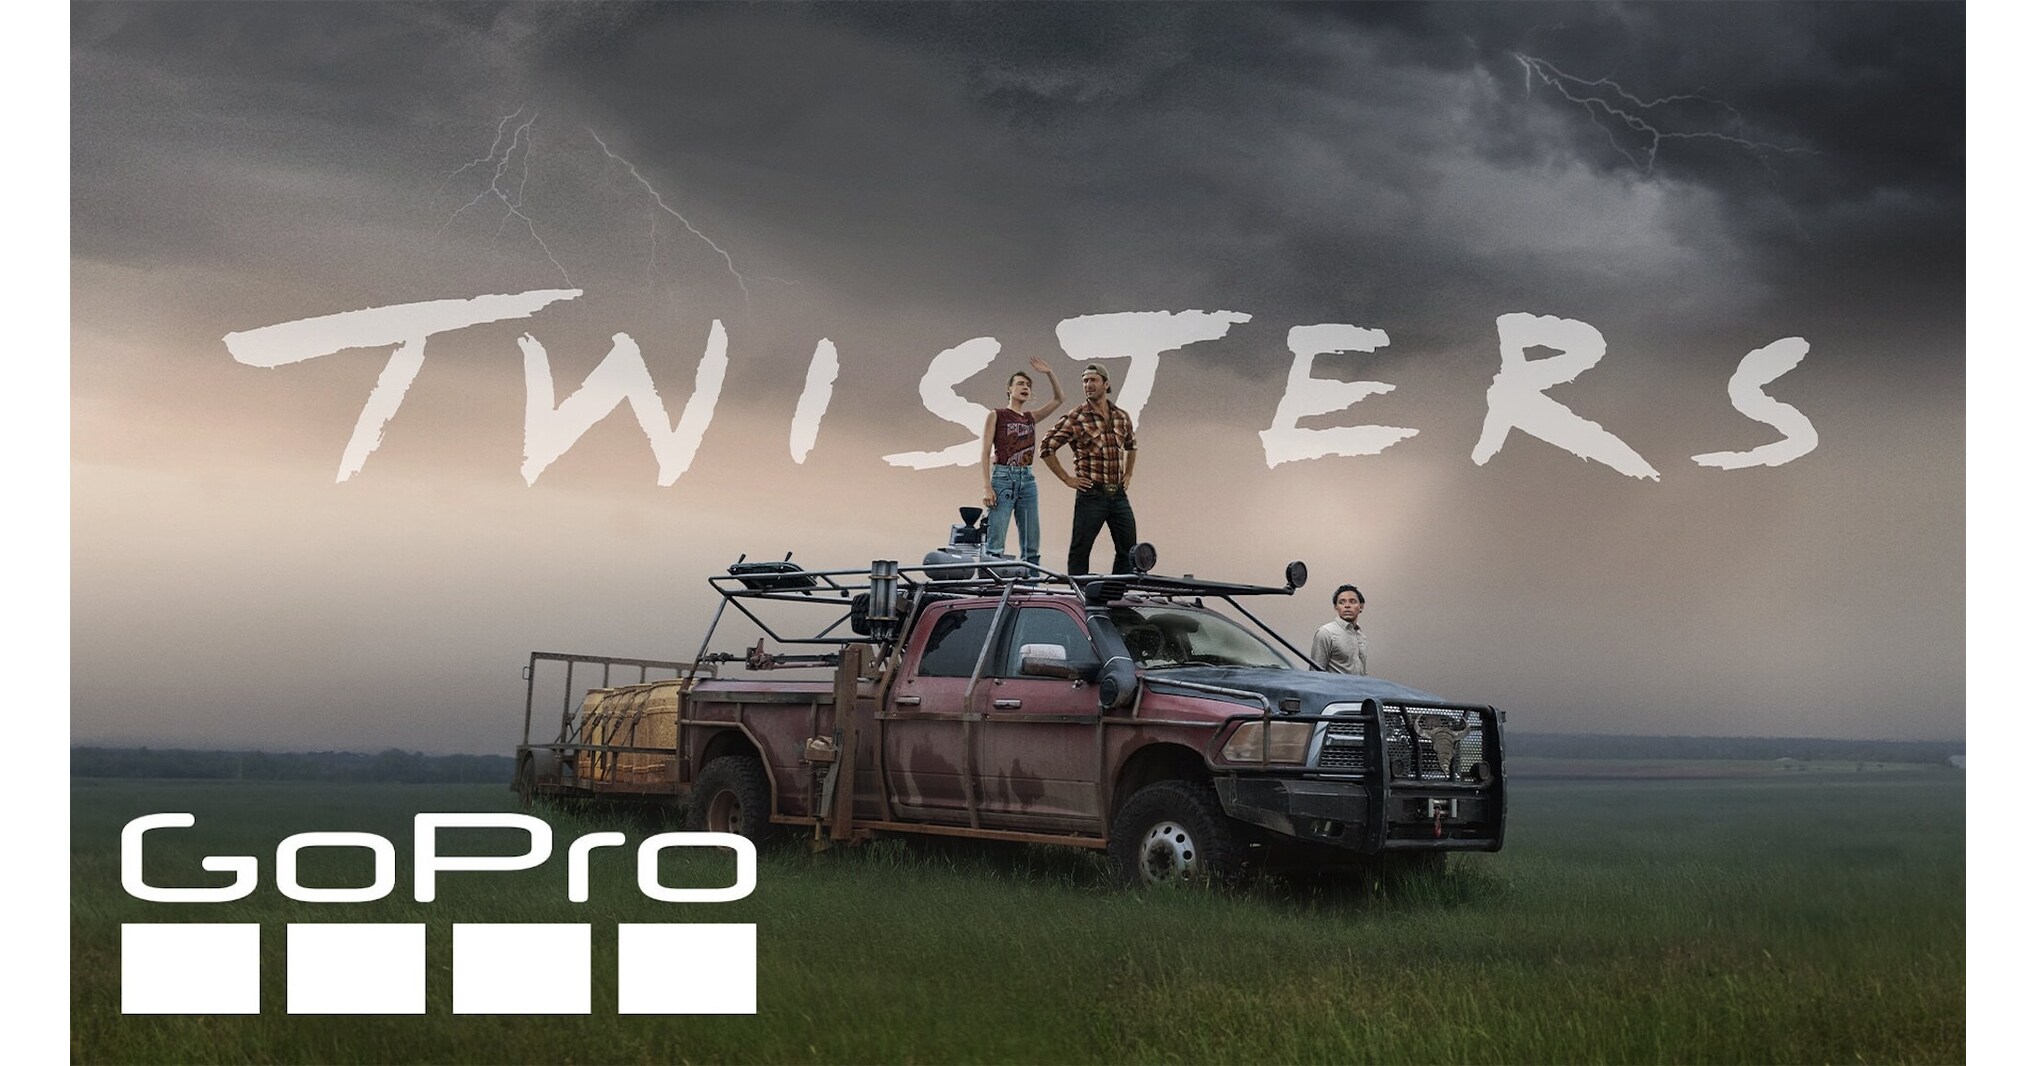 GoPro Brings You into the Eye of the Storm for Universal Pictures, Warner Bros. Pictures and Amblin Entertainment’s TWISTERS